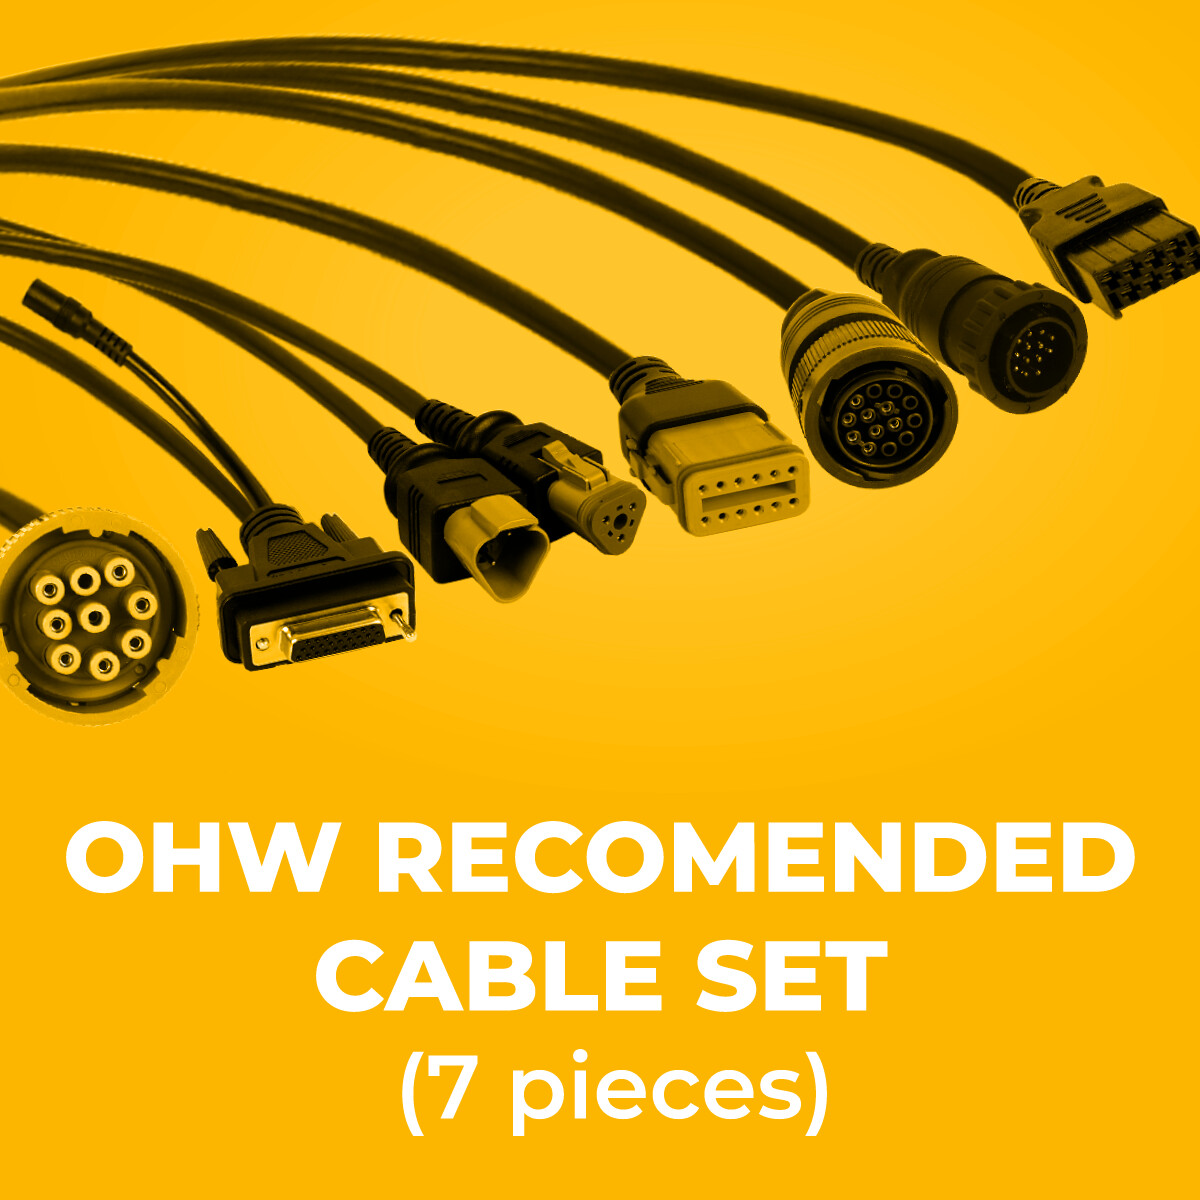 OHW Recommended Cable Set